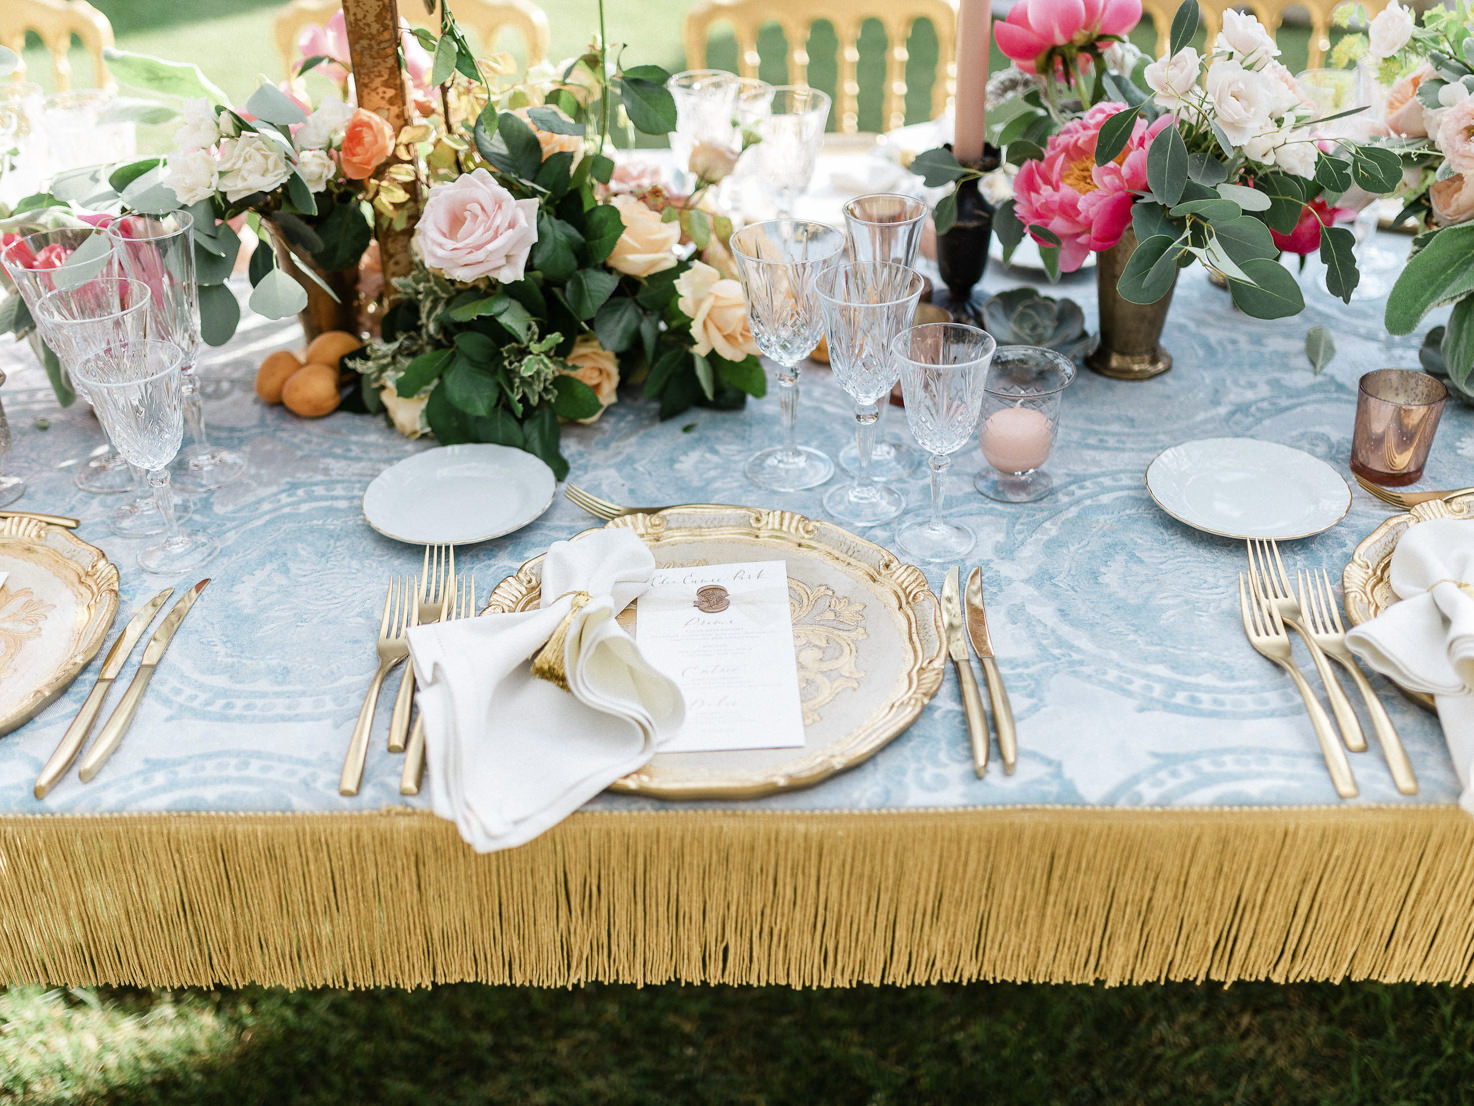 Table setting for wedding reception